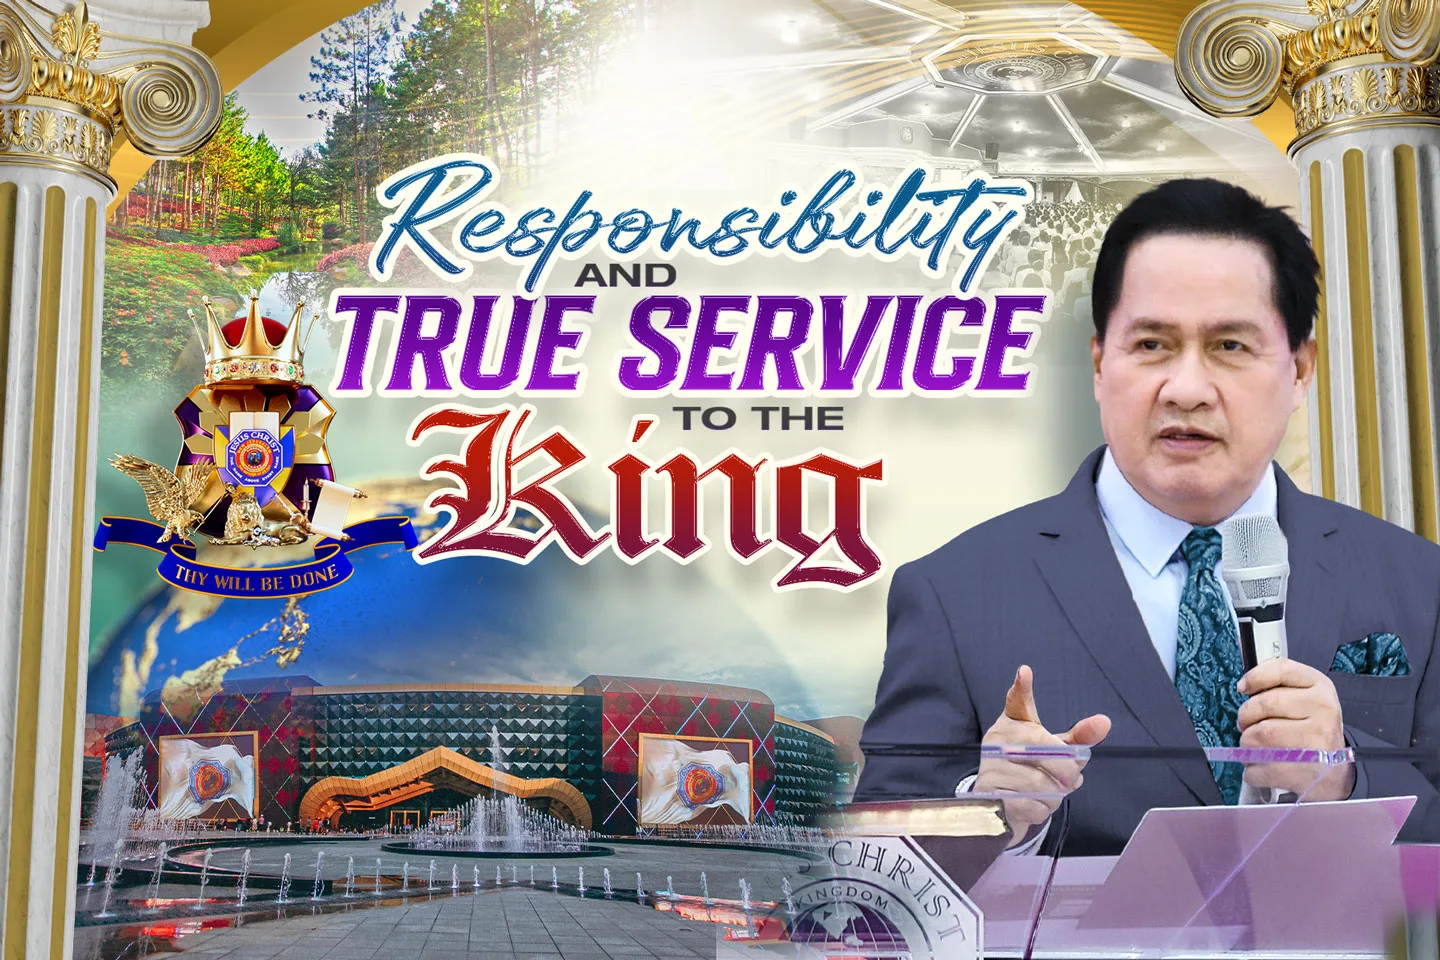 RESPONSIBILITY AND TRUE SERVICE TO THE KING